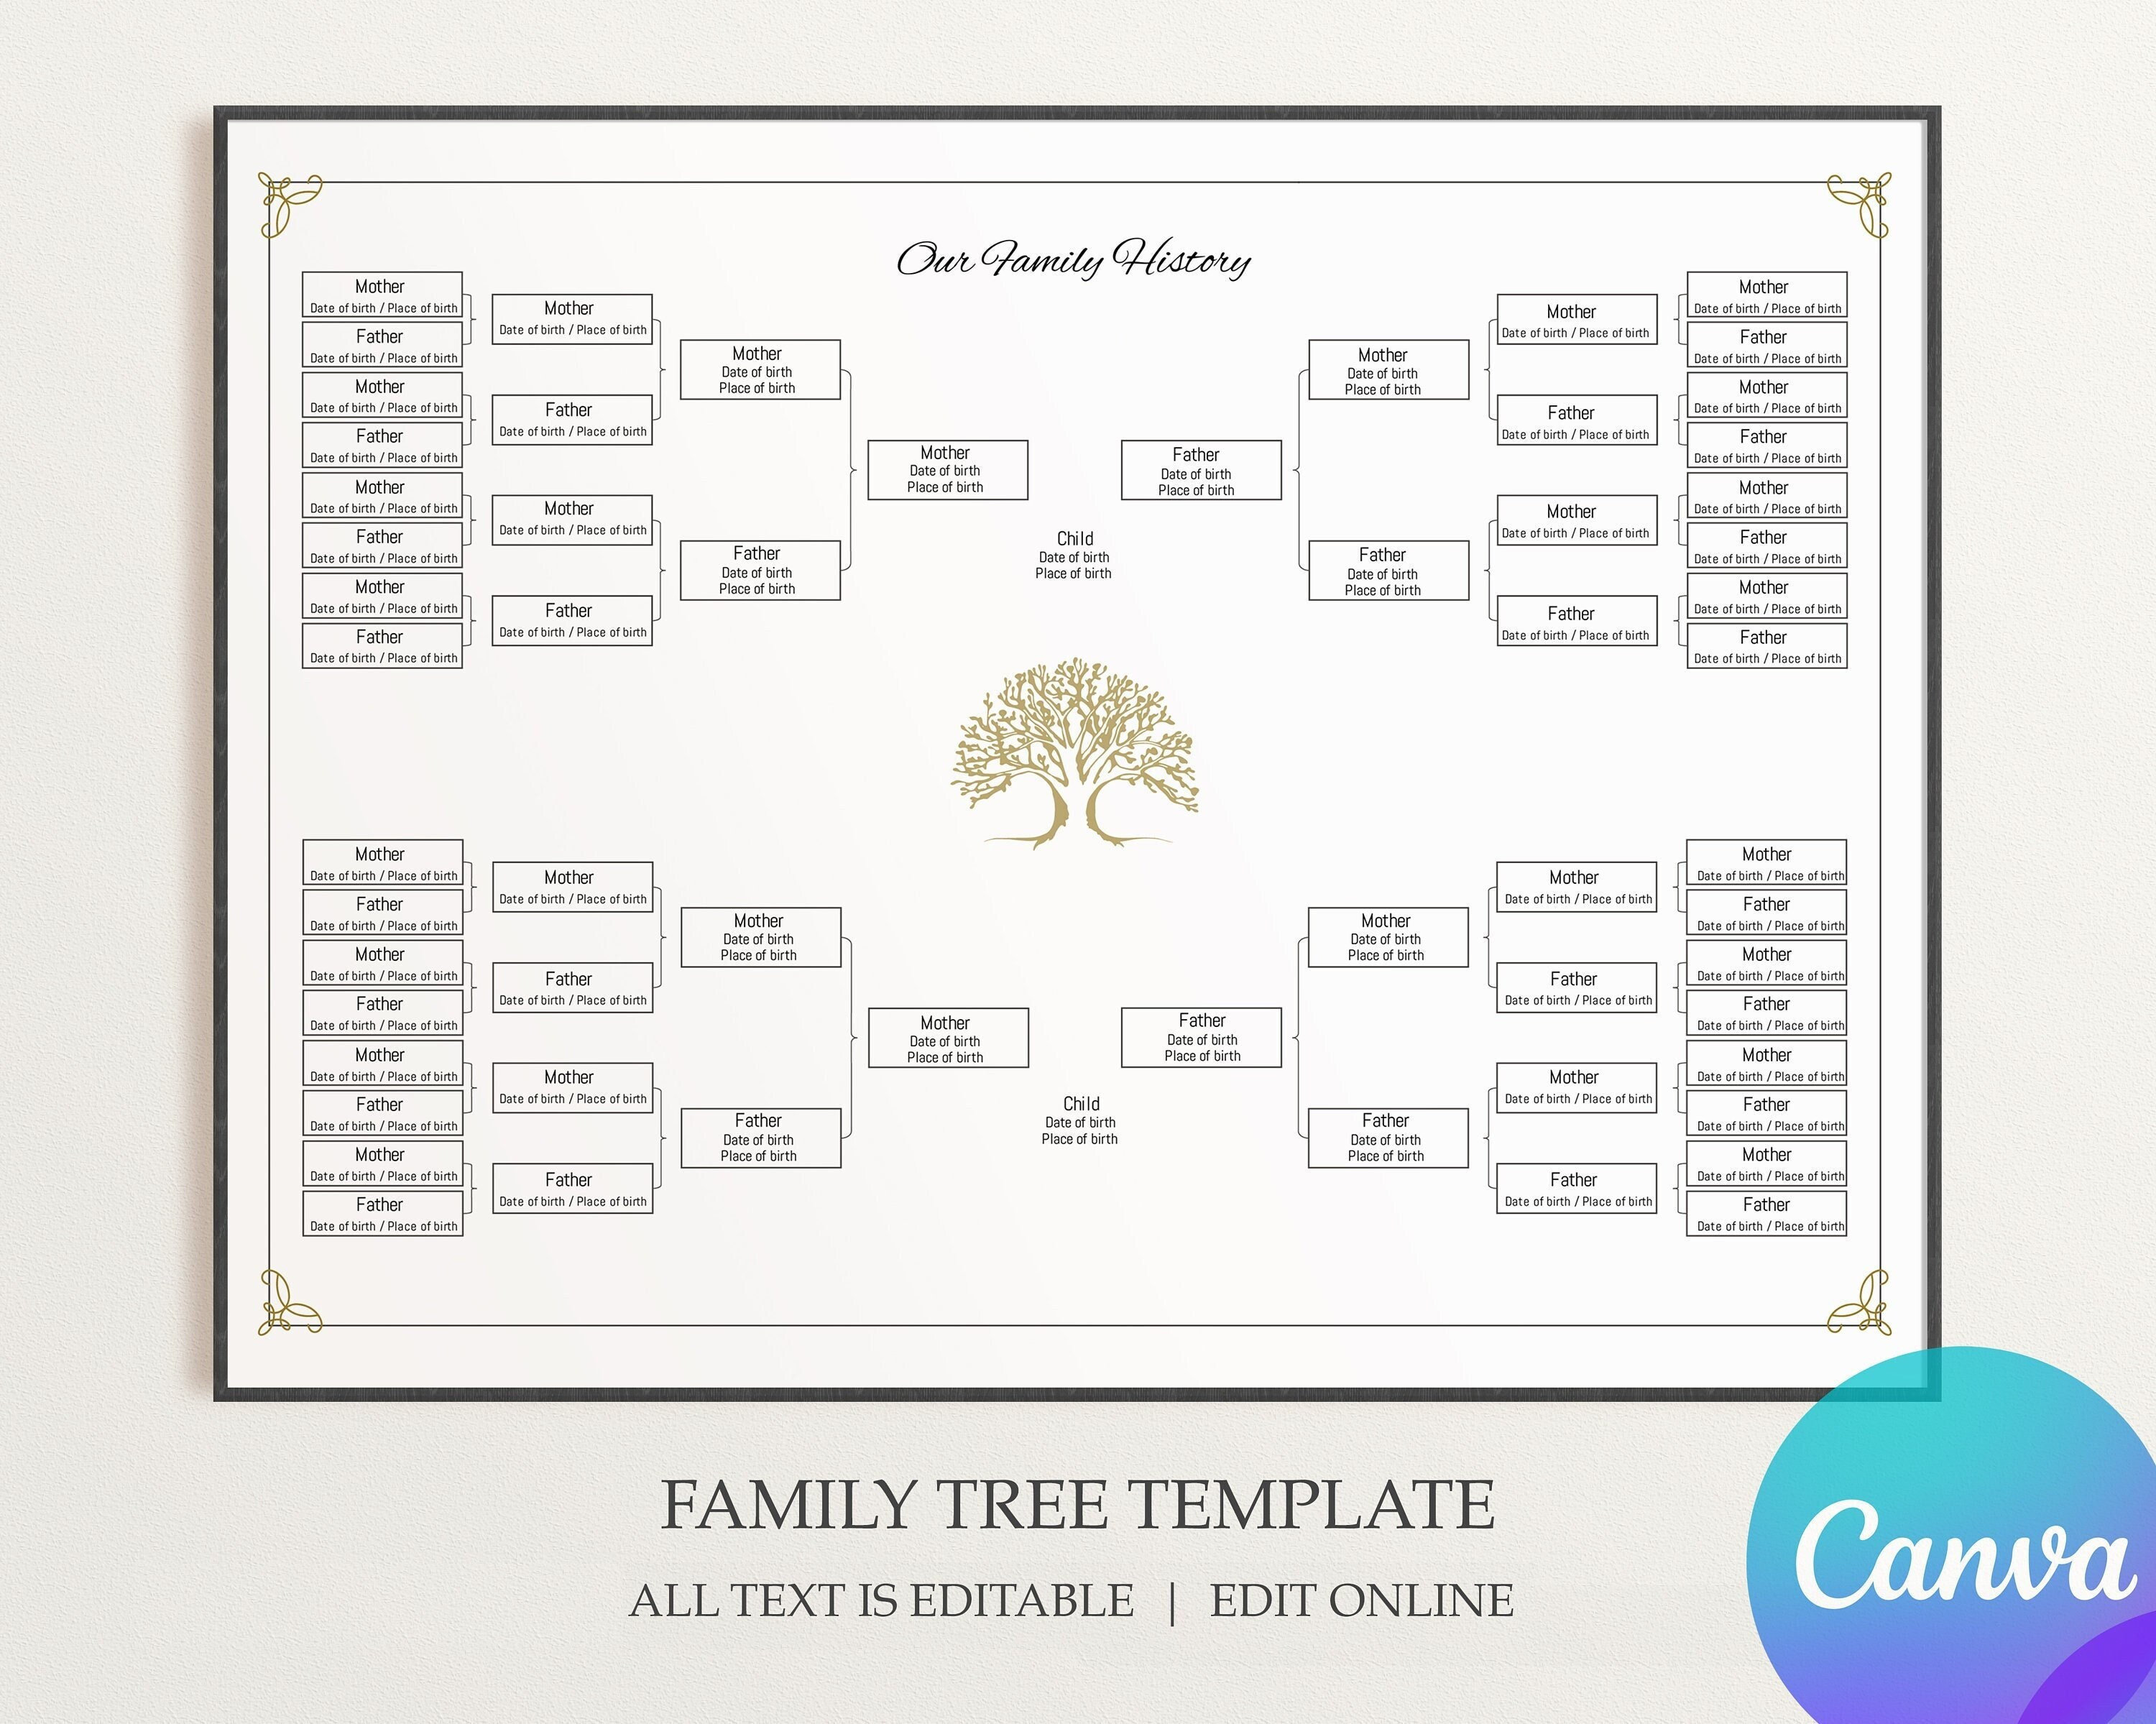 Recording The Family Tree: A 10 Generation Genealogy Organizer Workbook  With Fillable Family Tree, Charts, And Forms To Record The Family History  And